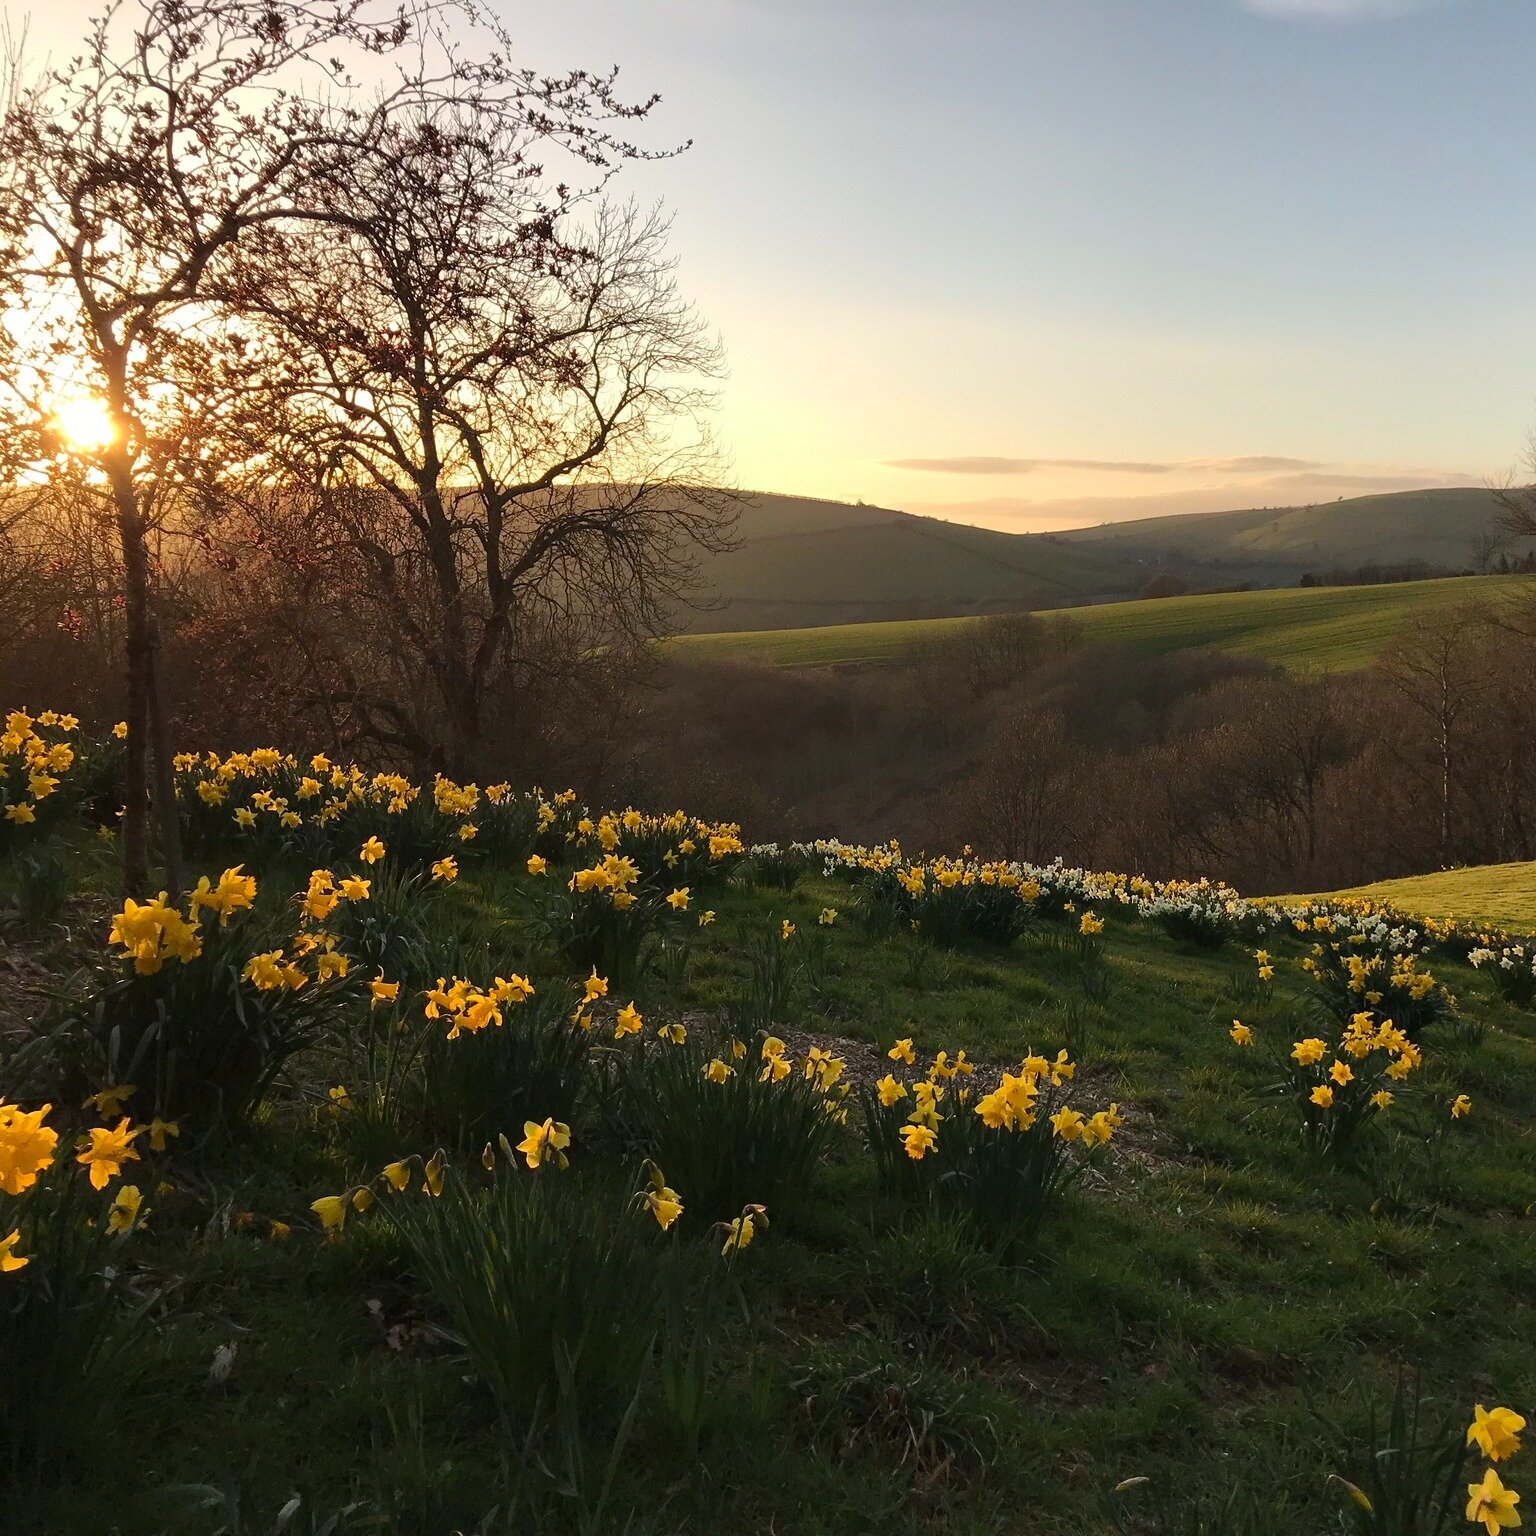 Hello April! 🌸 As longer days and delightful weather emerges, let's warmly welcome this month and immerse ourselves in the natural wonders that accompany it. 🌼

The vibrant daffodils and awe-inspiring views from Great Hagley await, reminding us of 